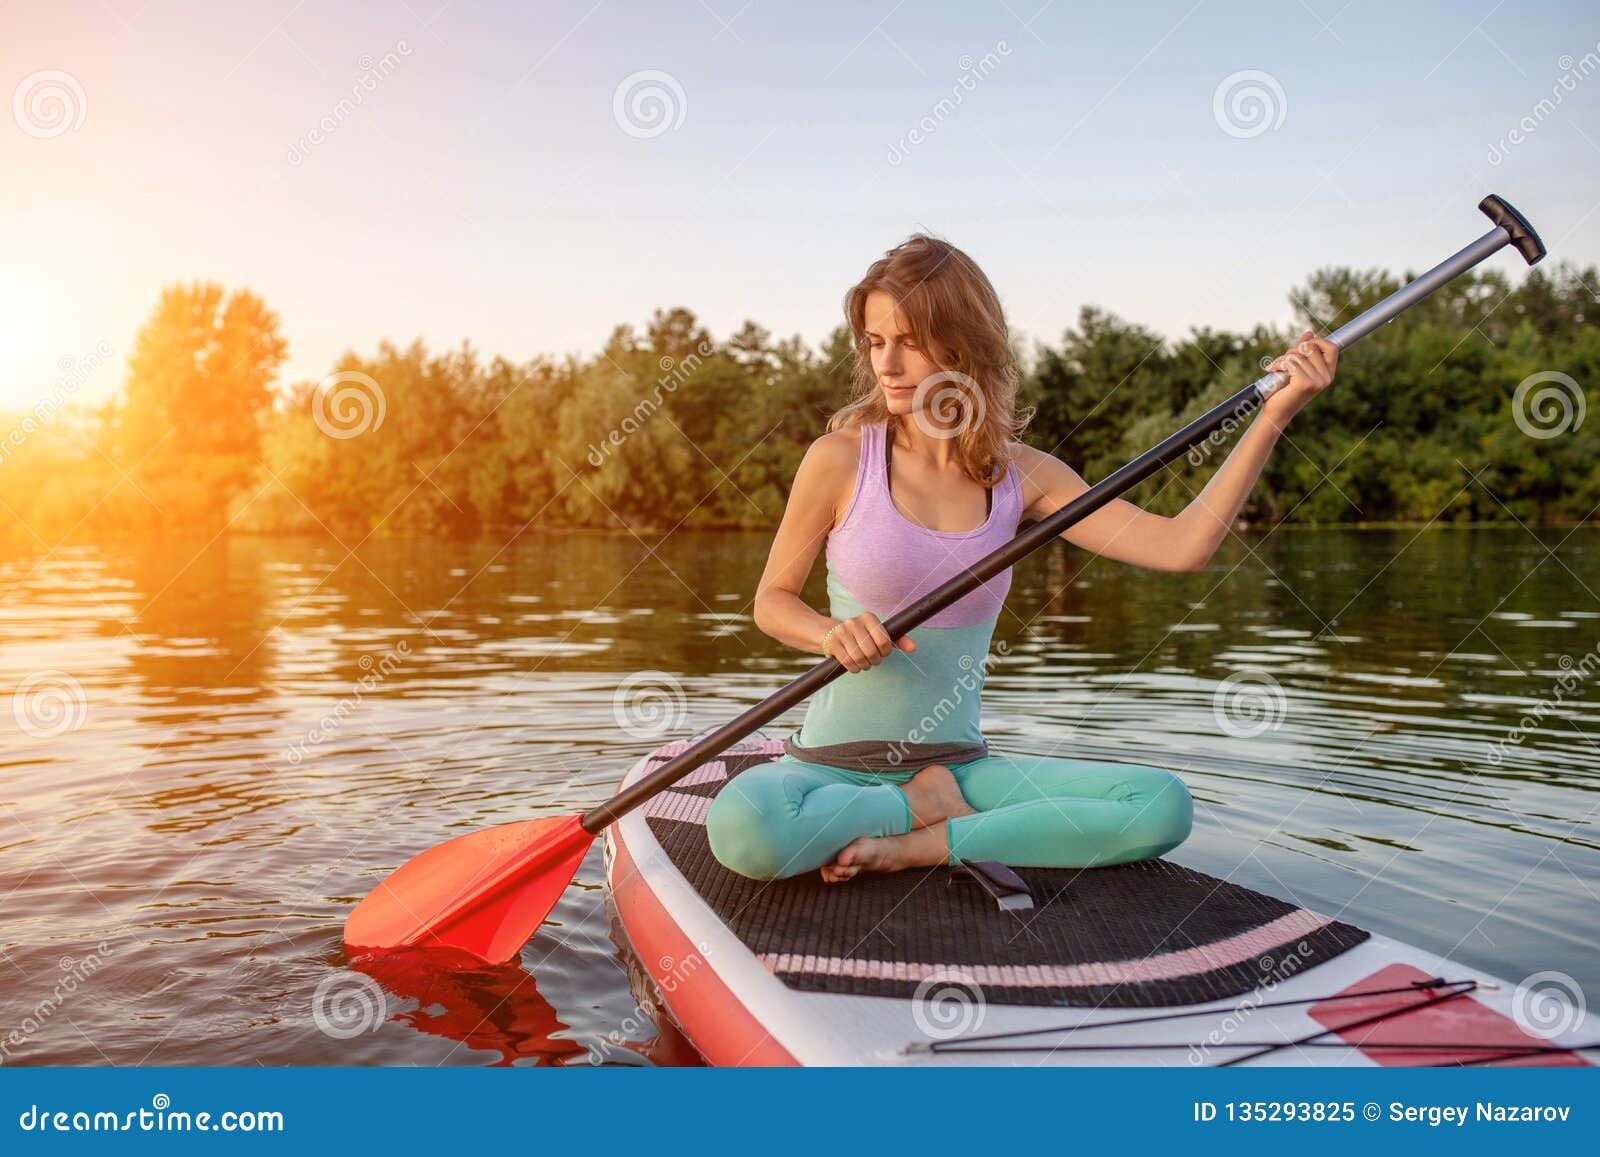 Young Woman Sitting on Paddle Board, Practicing Yoga Pose. Doing Yoga ...